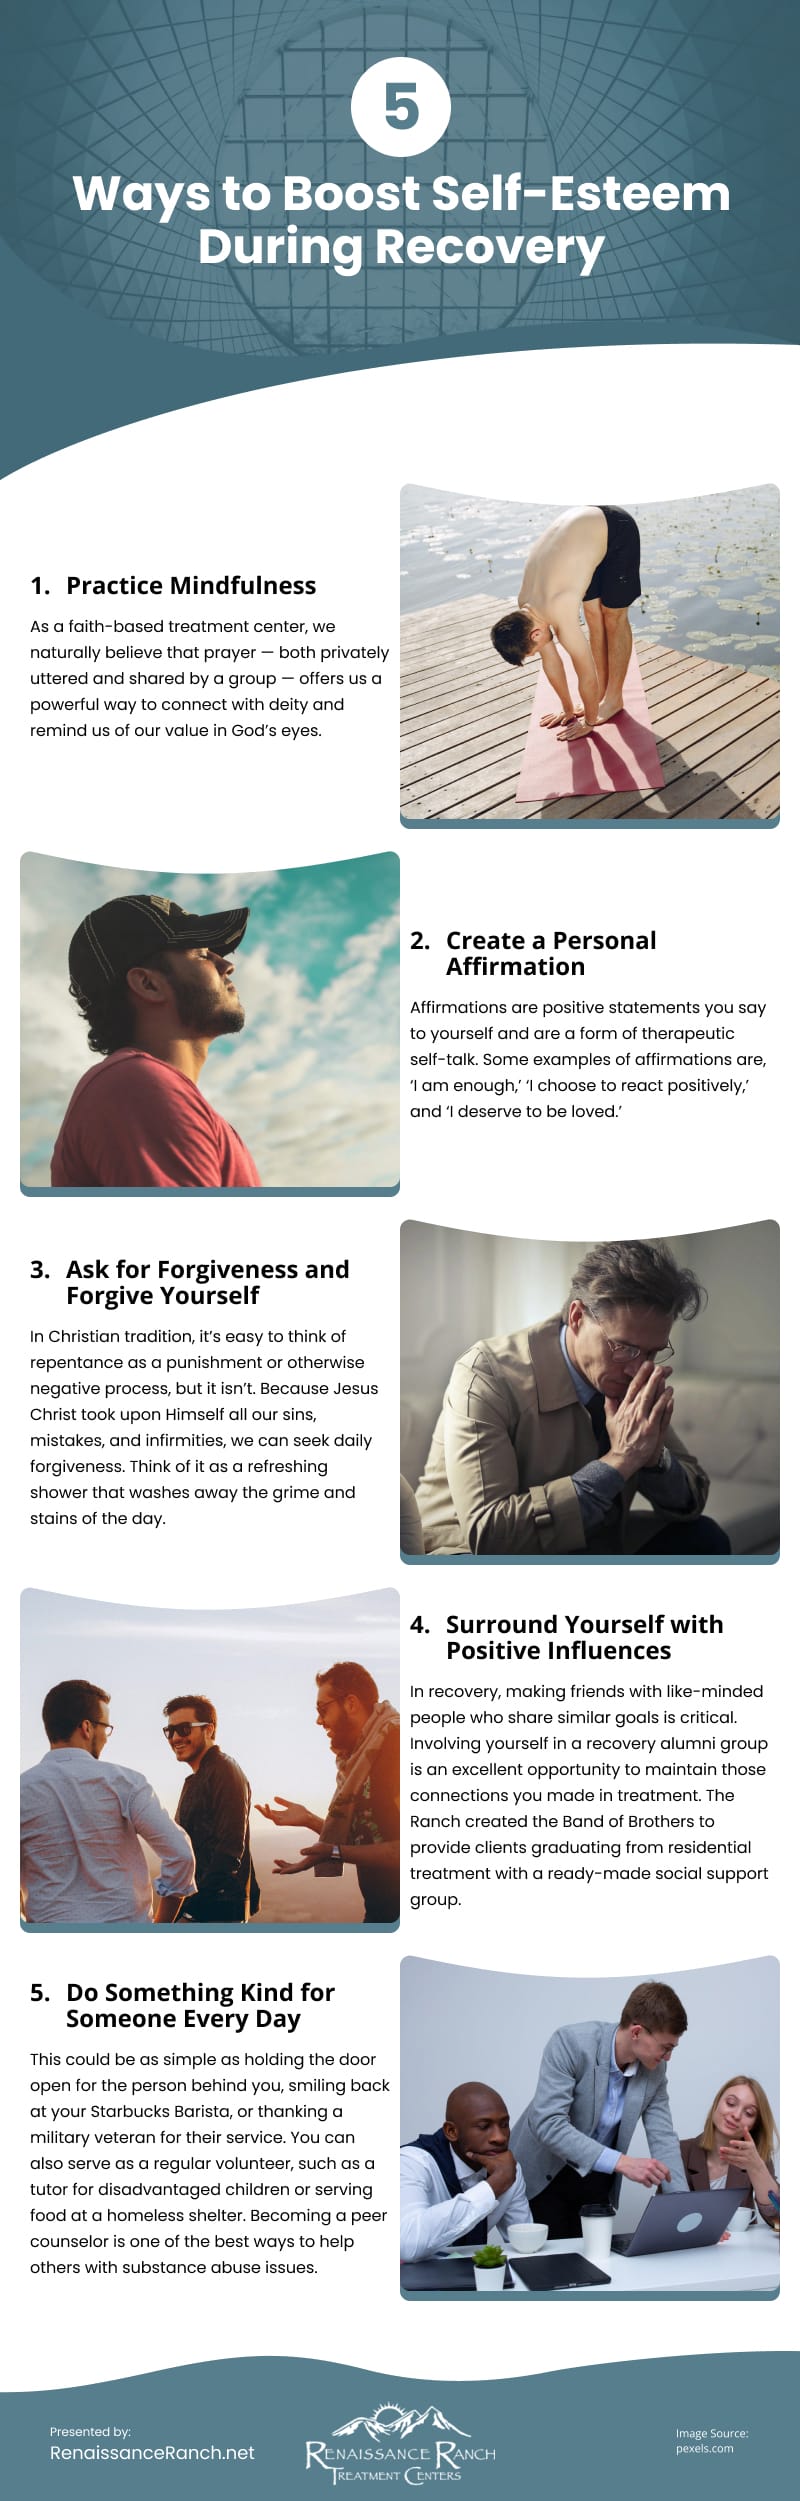 5 Ways to Boost Self-Esteem During Recovery Infographic